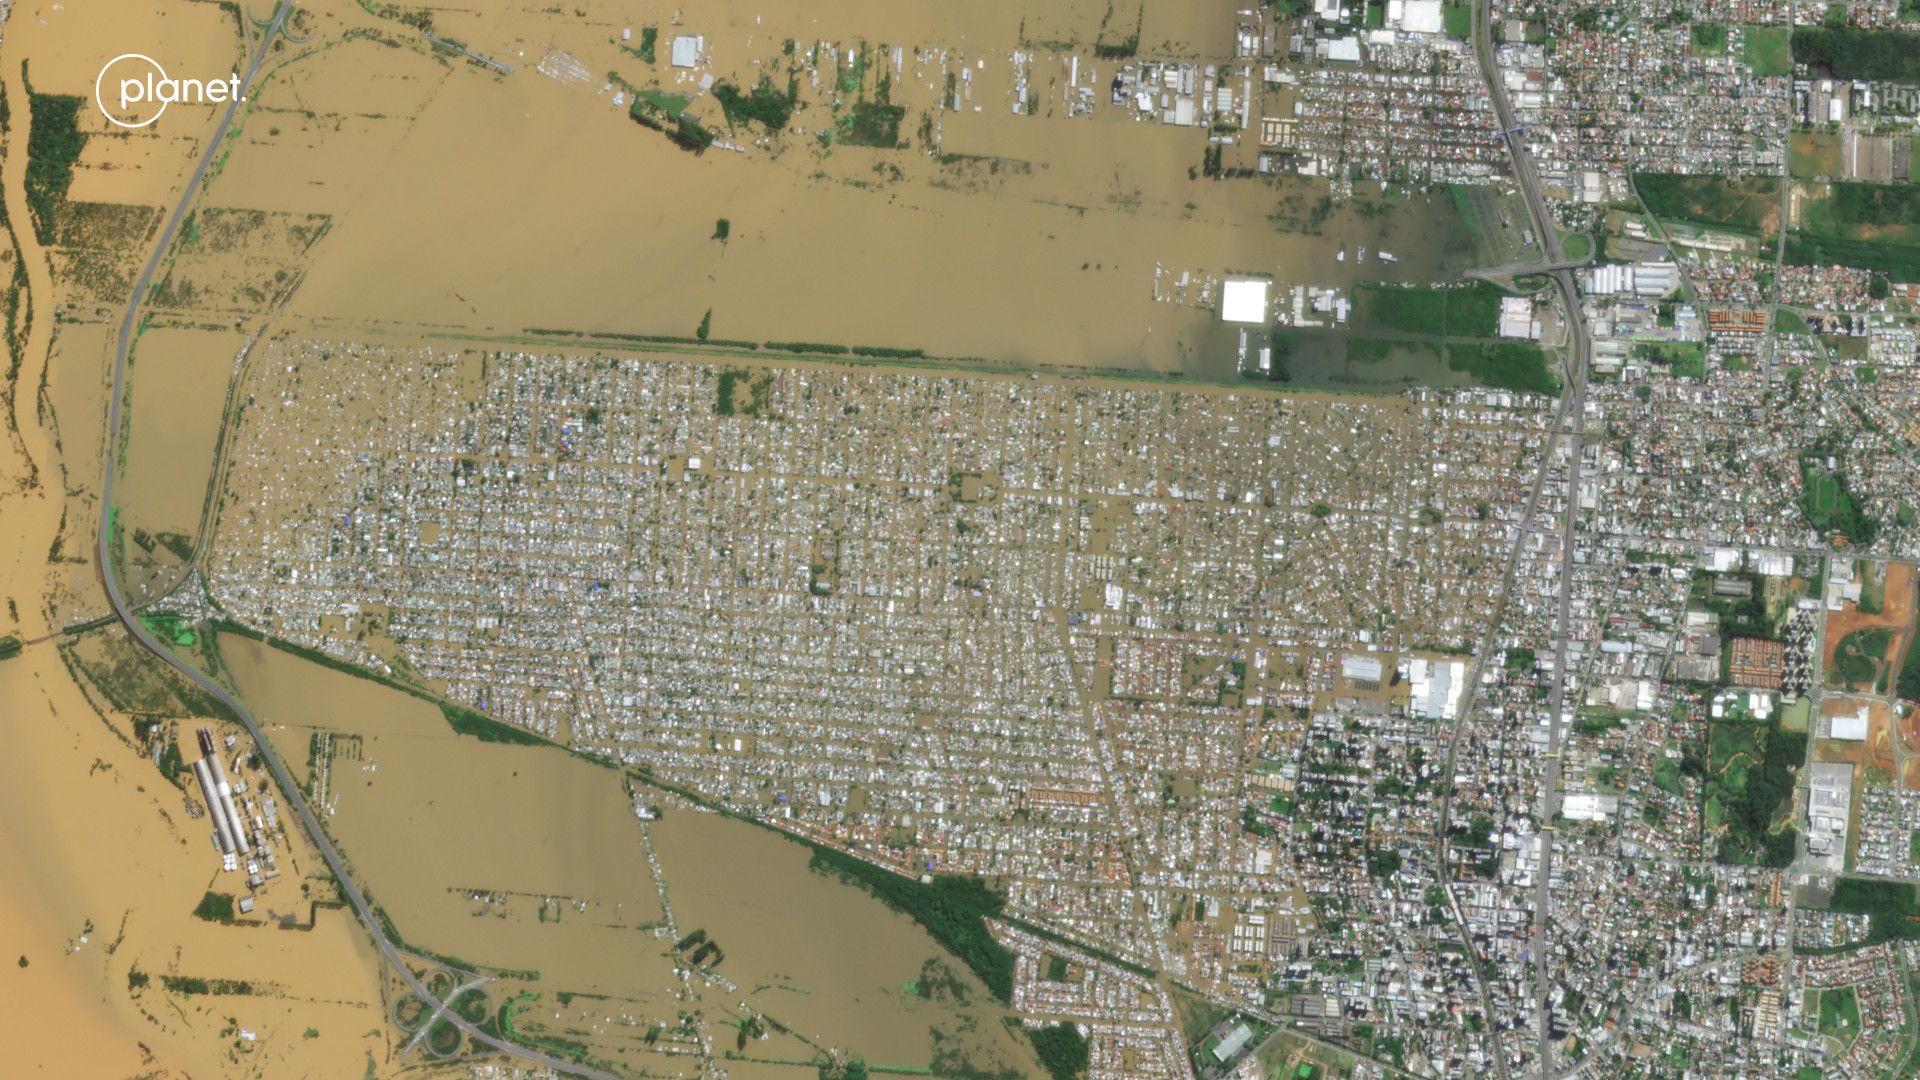 See Before and After Municipalities in Rio Grande do Sul After Being Inundated by Floods